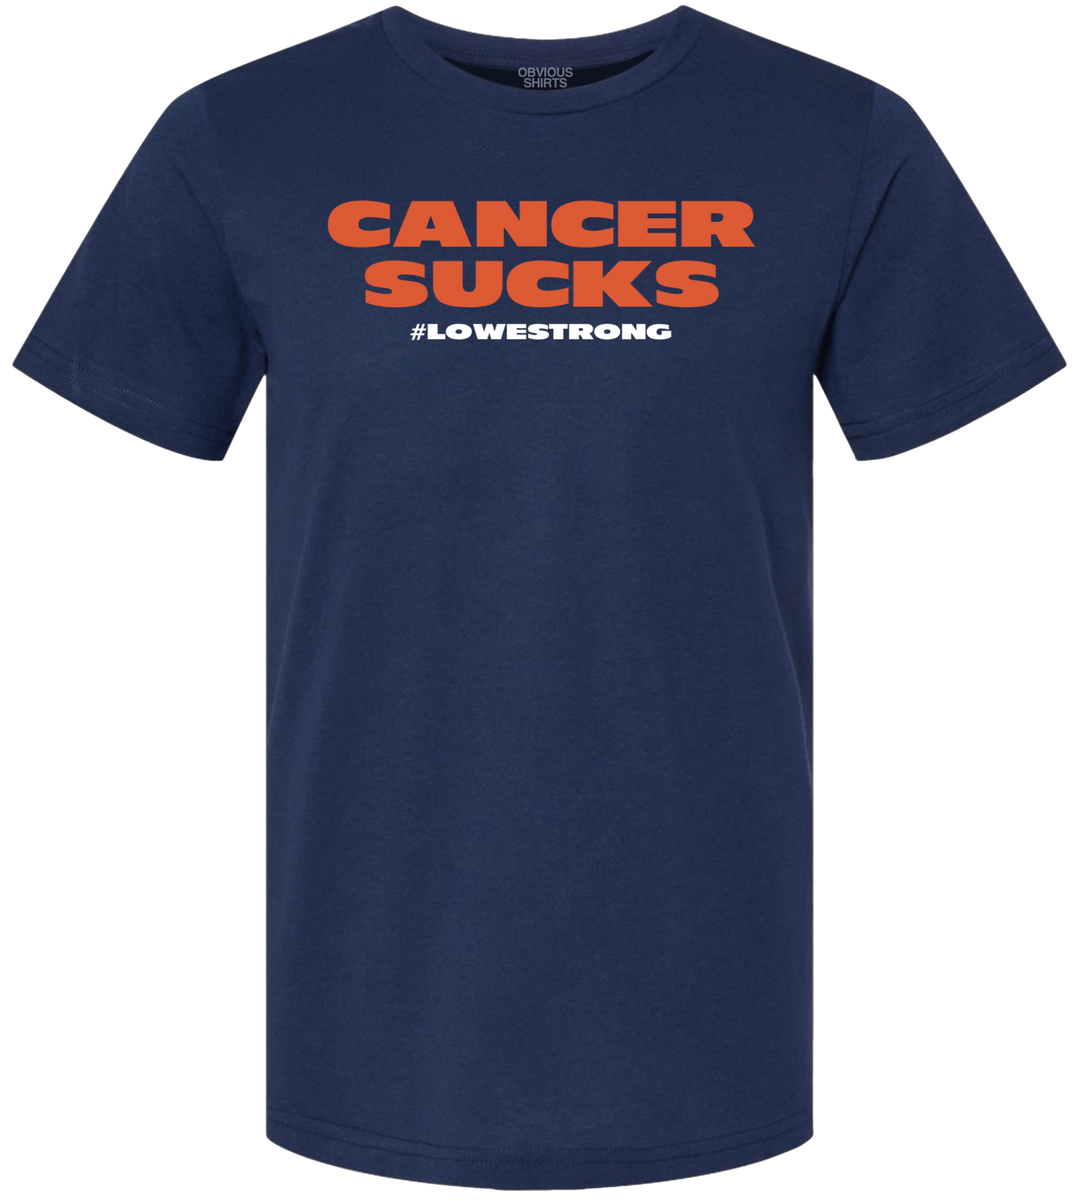 CANCER SUCKS #LOWESTRONG (100% DONATED) - OBVIOUS SHIRTS